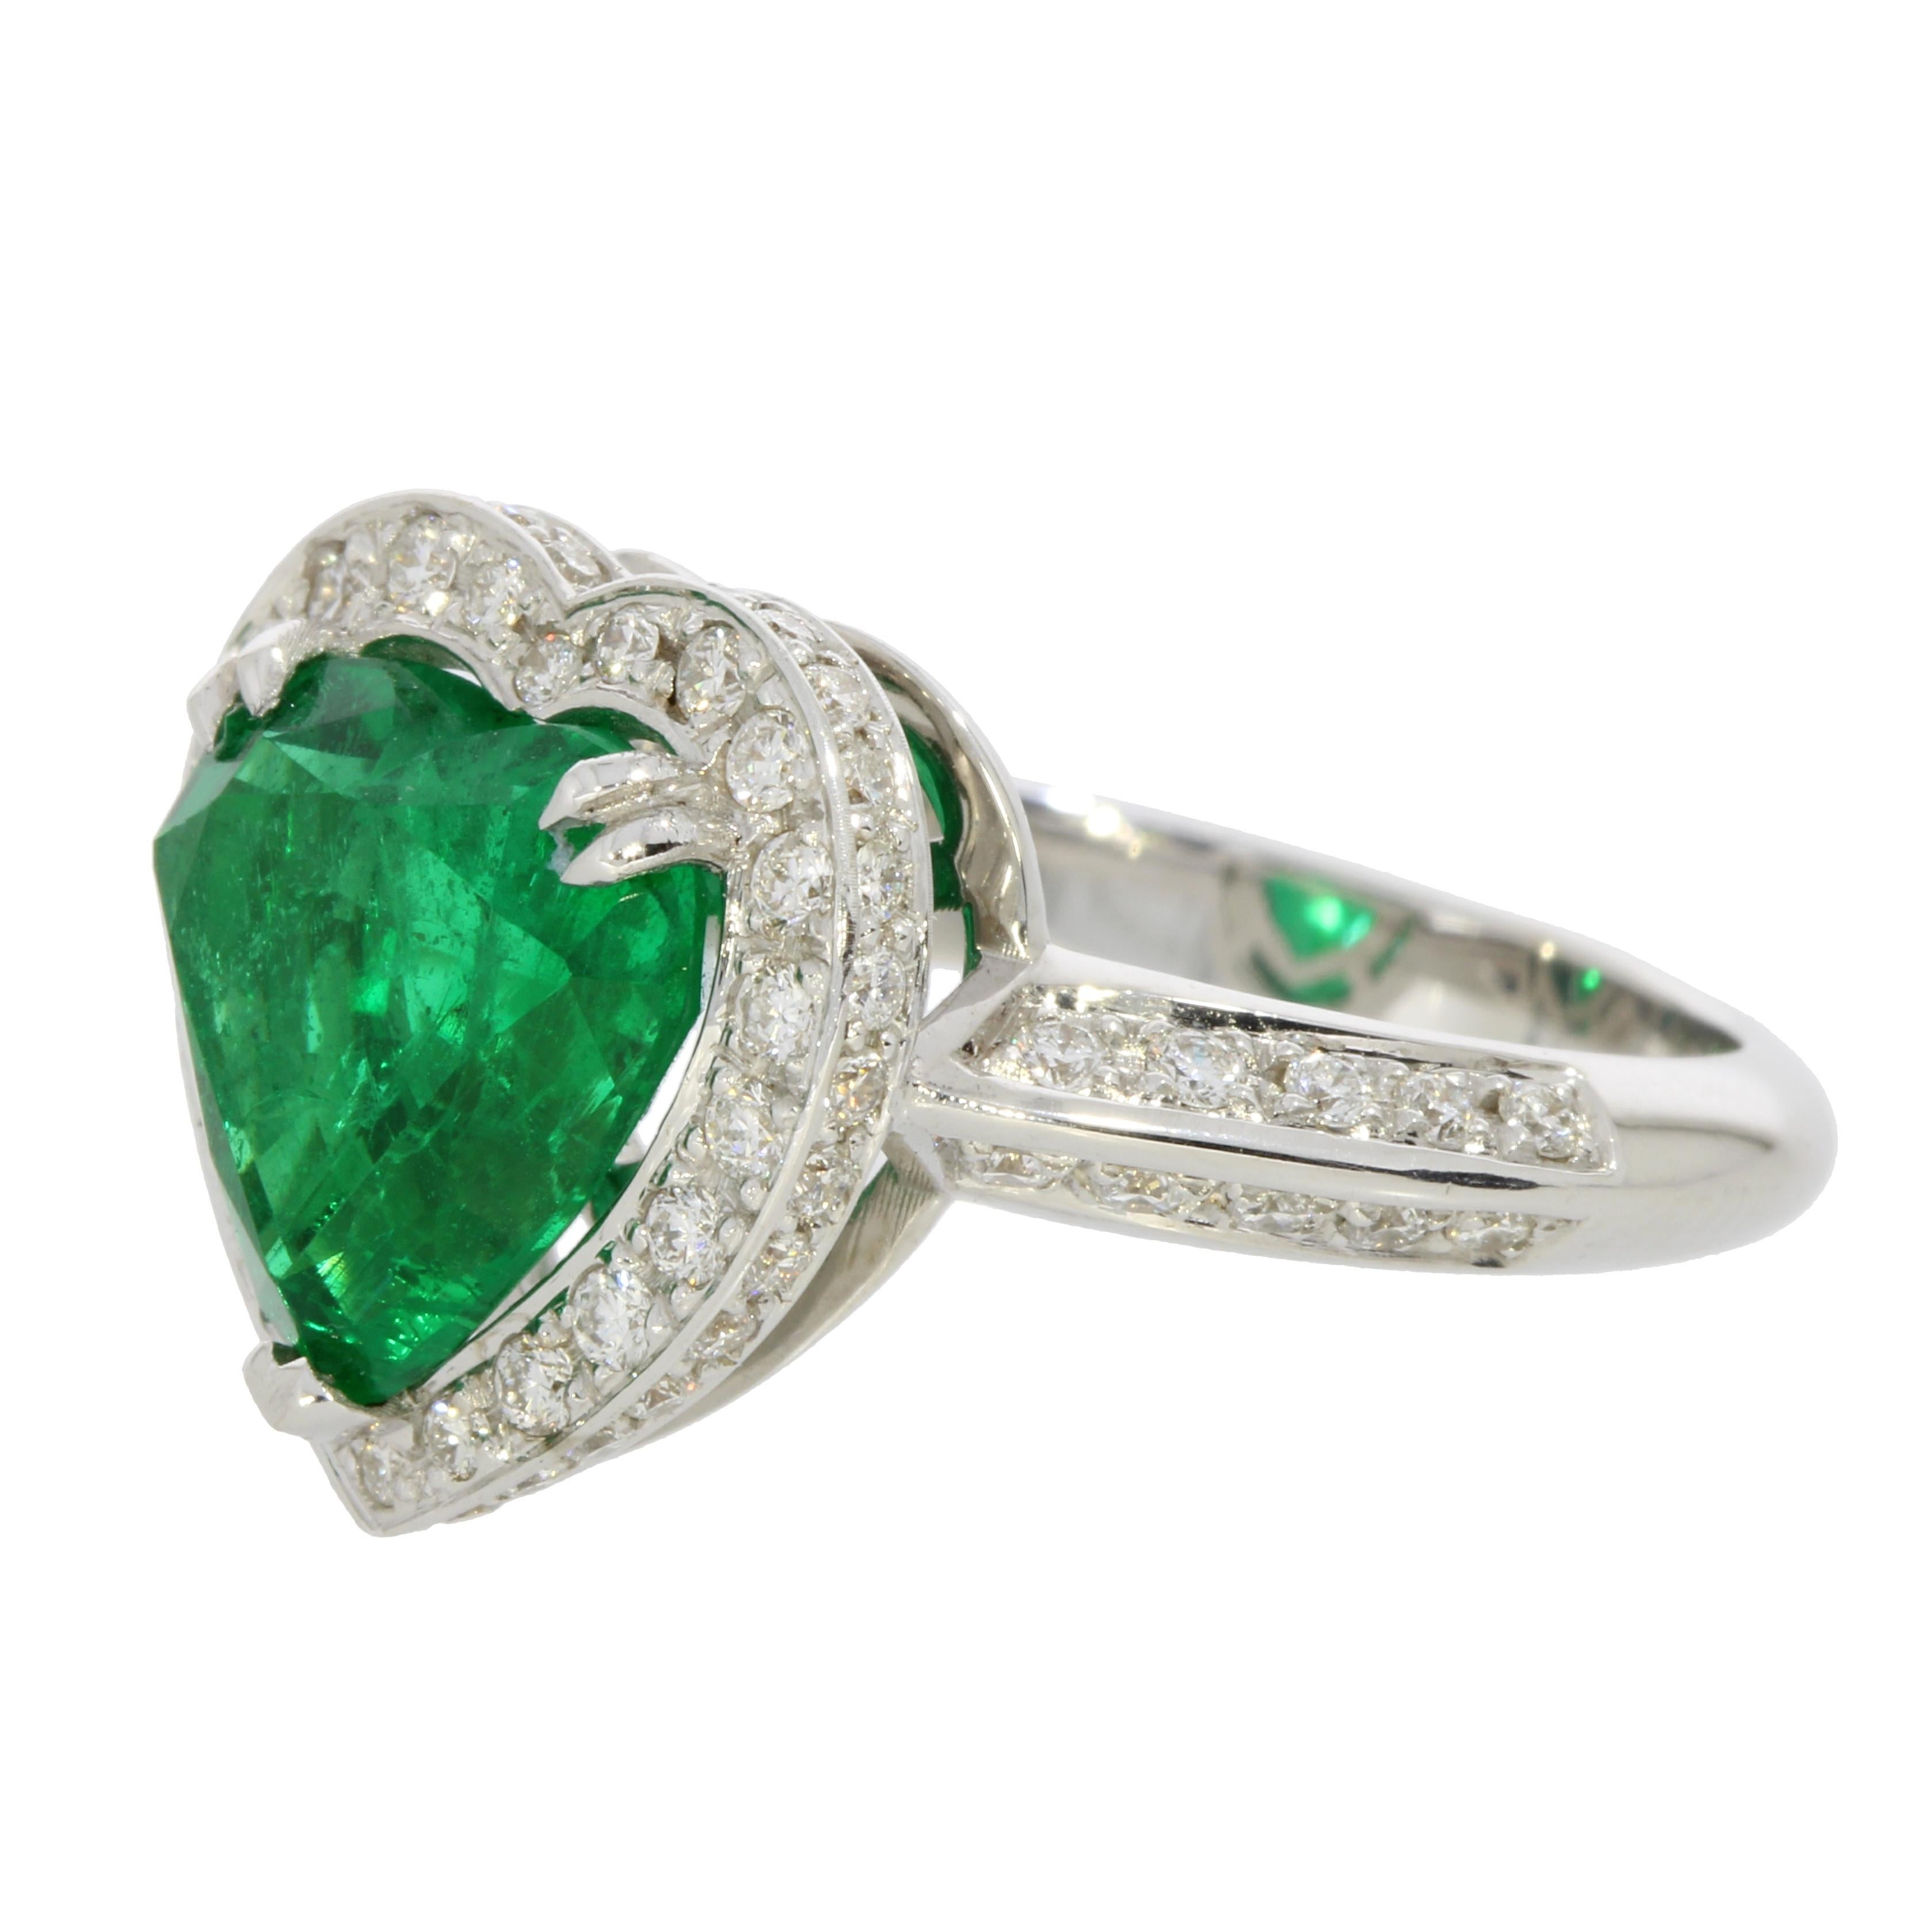 Contemporary Emerald and Diamond Heart Ring 18 Karat White Gold Collection by Niquesa